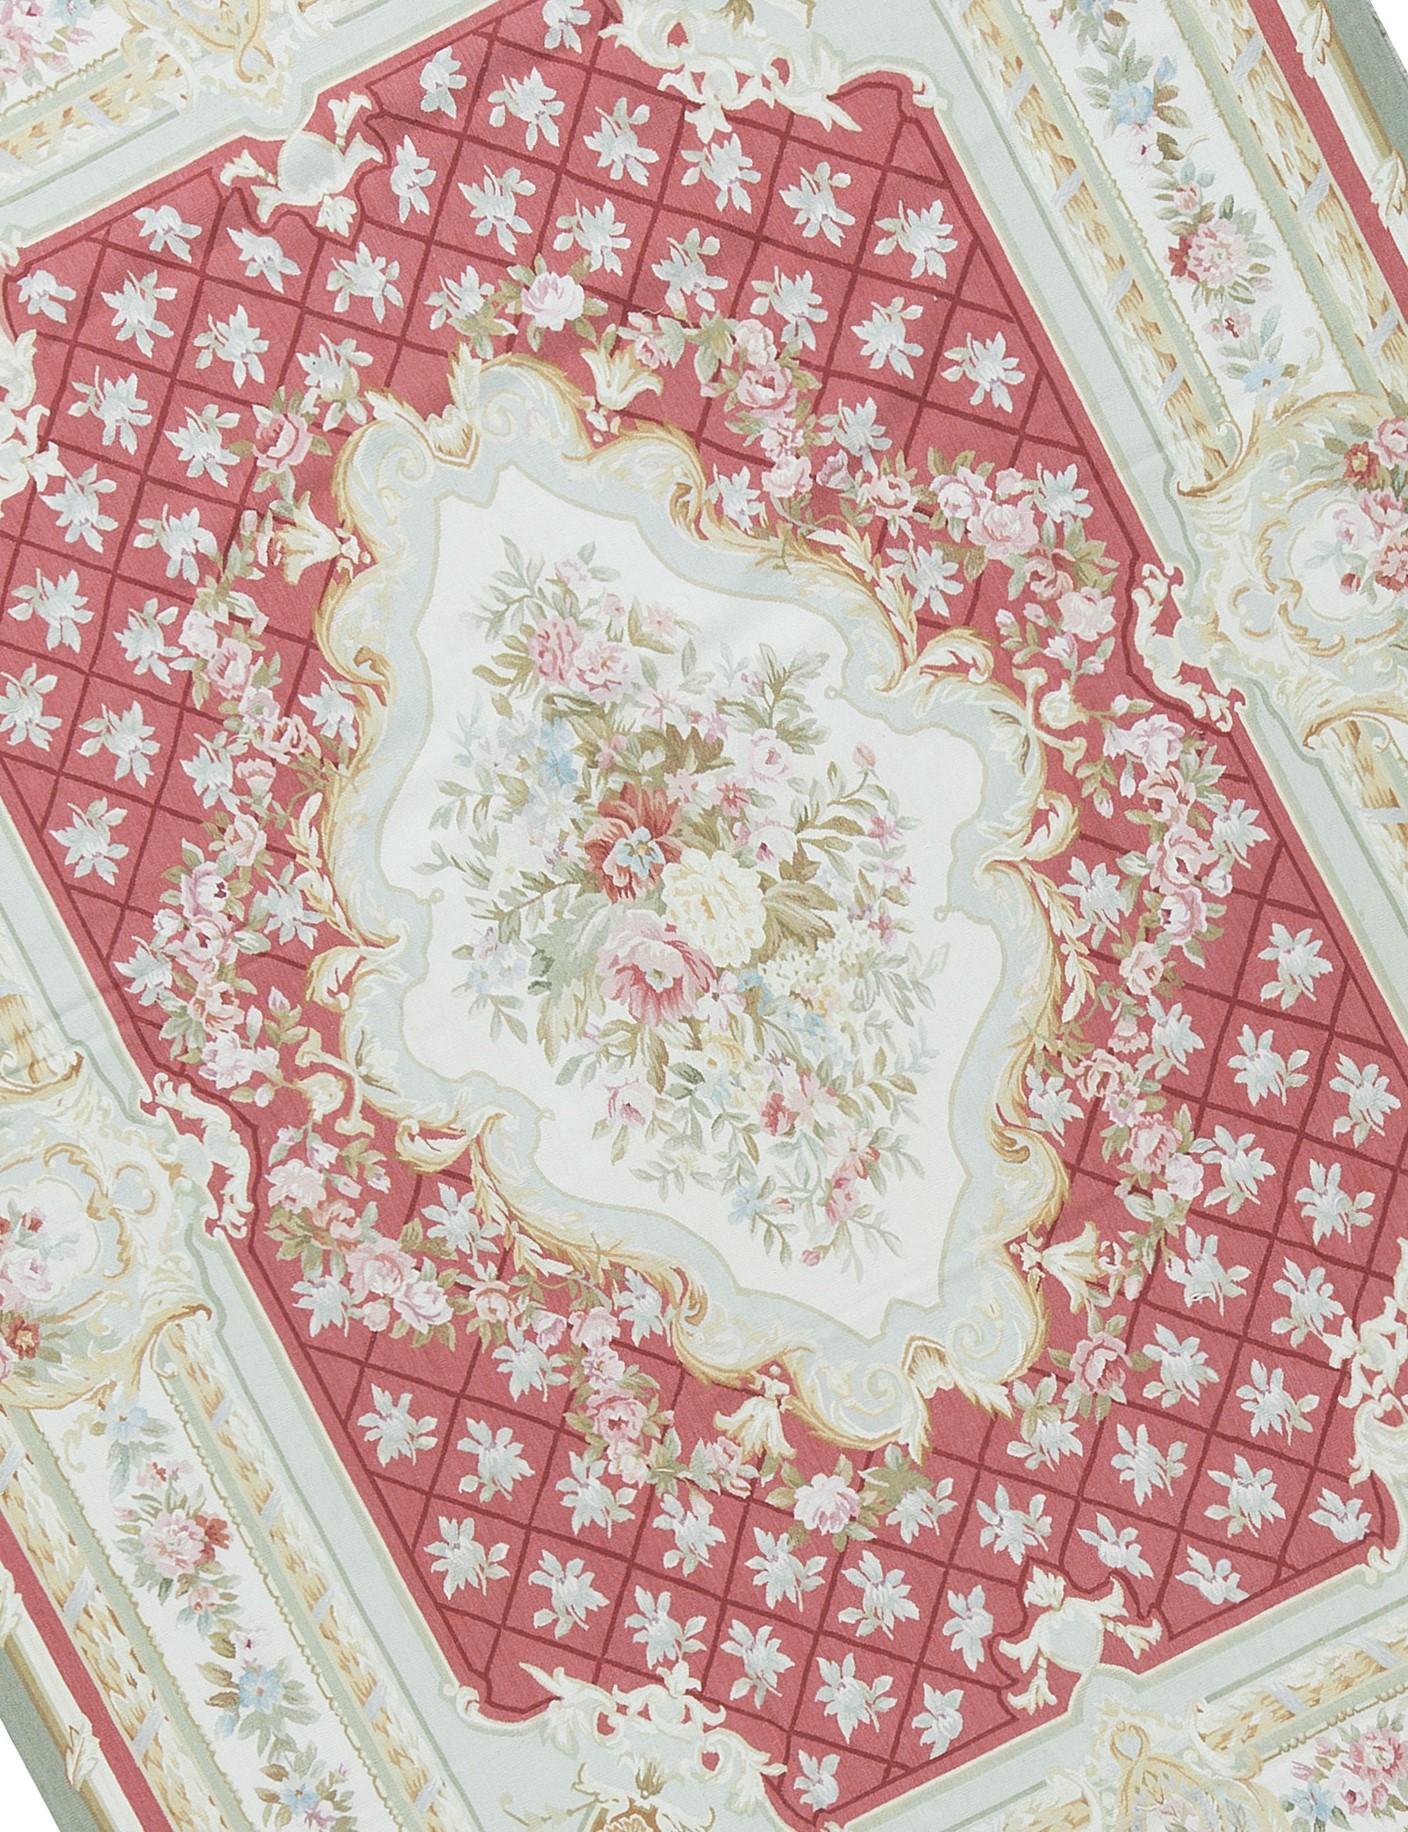 rench flat-weave Aubusson rugs that have been found in the finest homes and palaces since the late 17th century. Size: “x”.